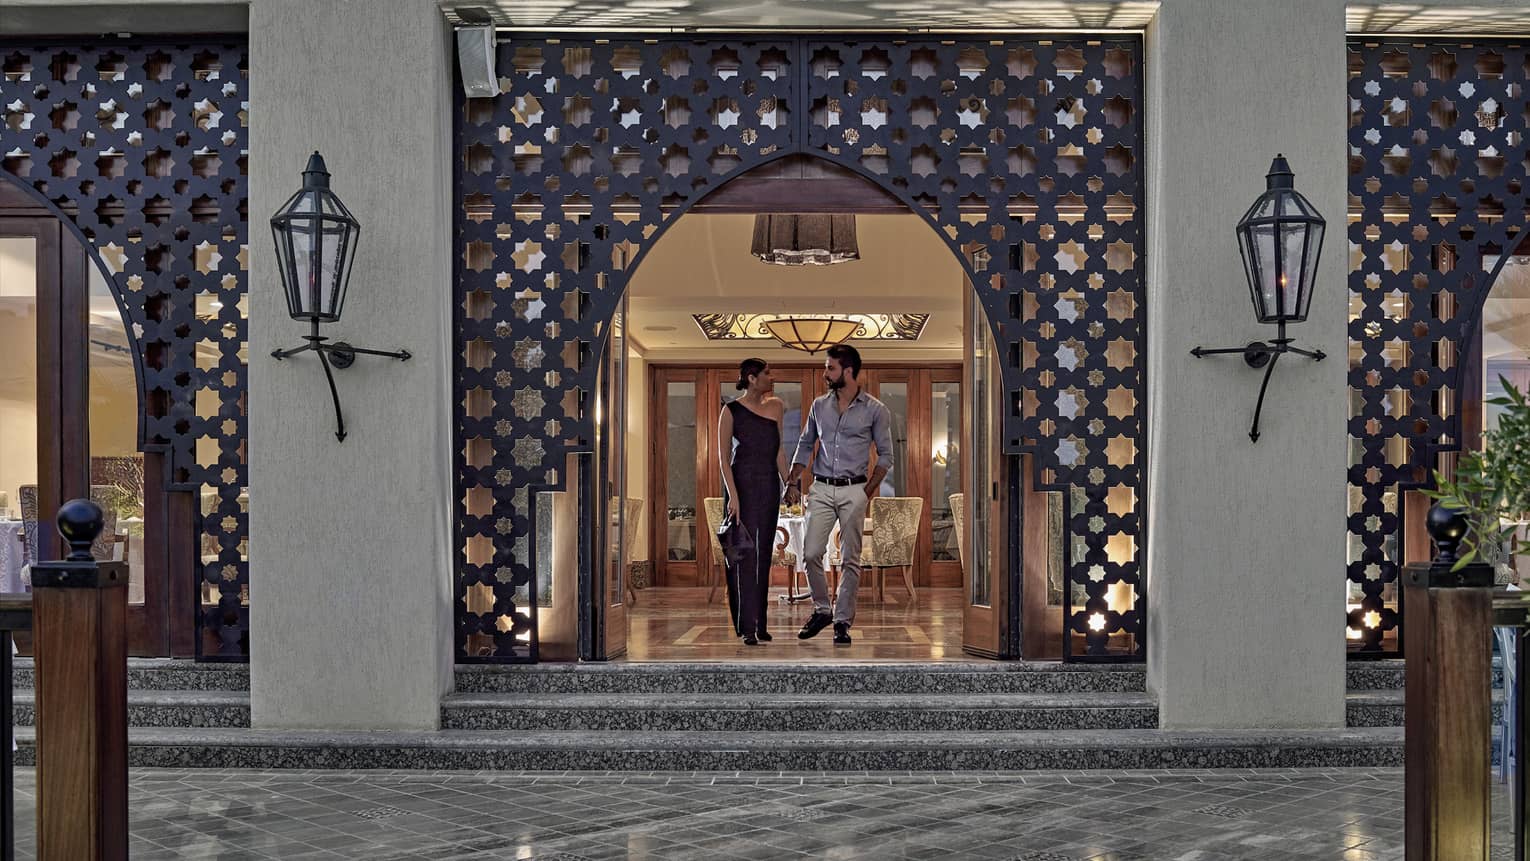 Man and woman walking out of a restaurant with Arabesque detailing around doorway